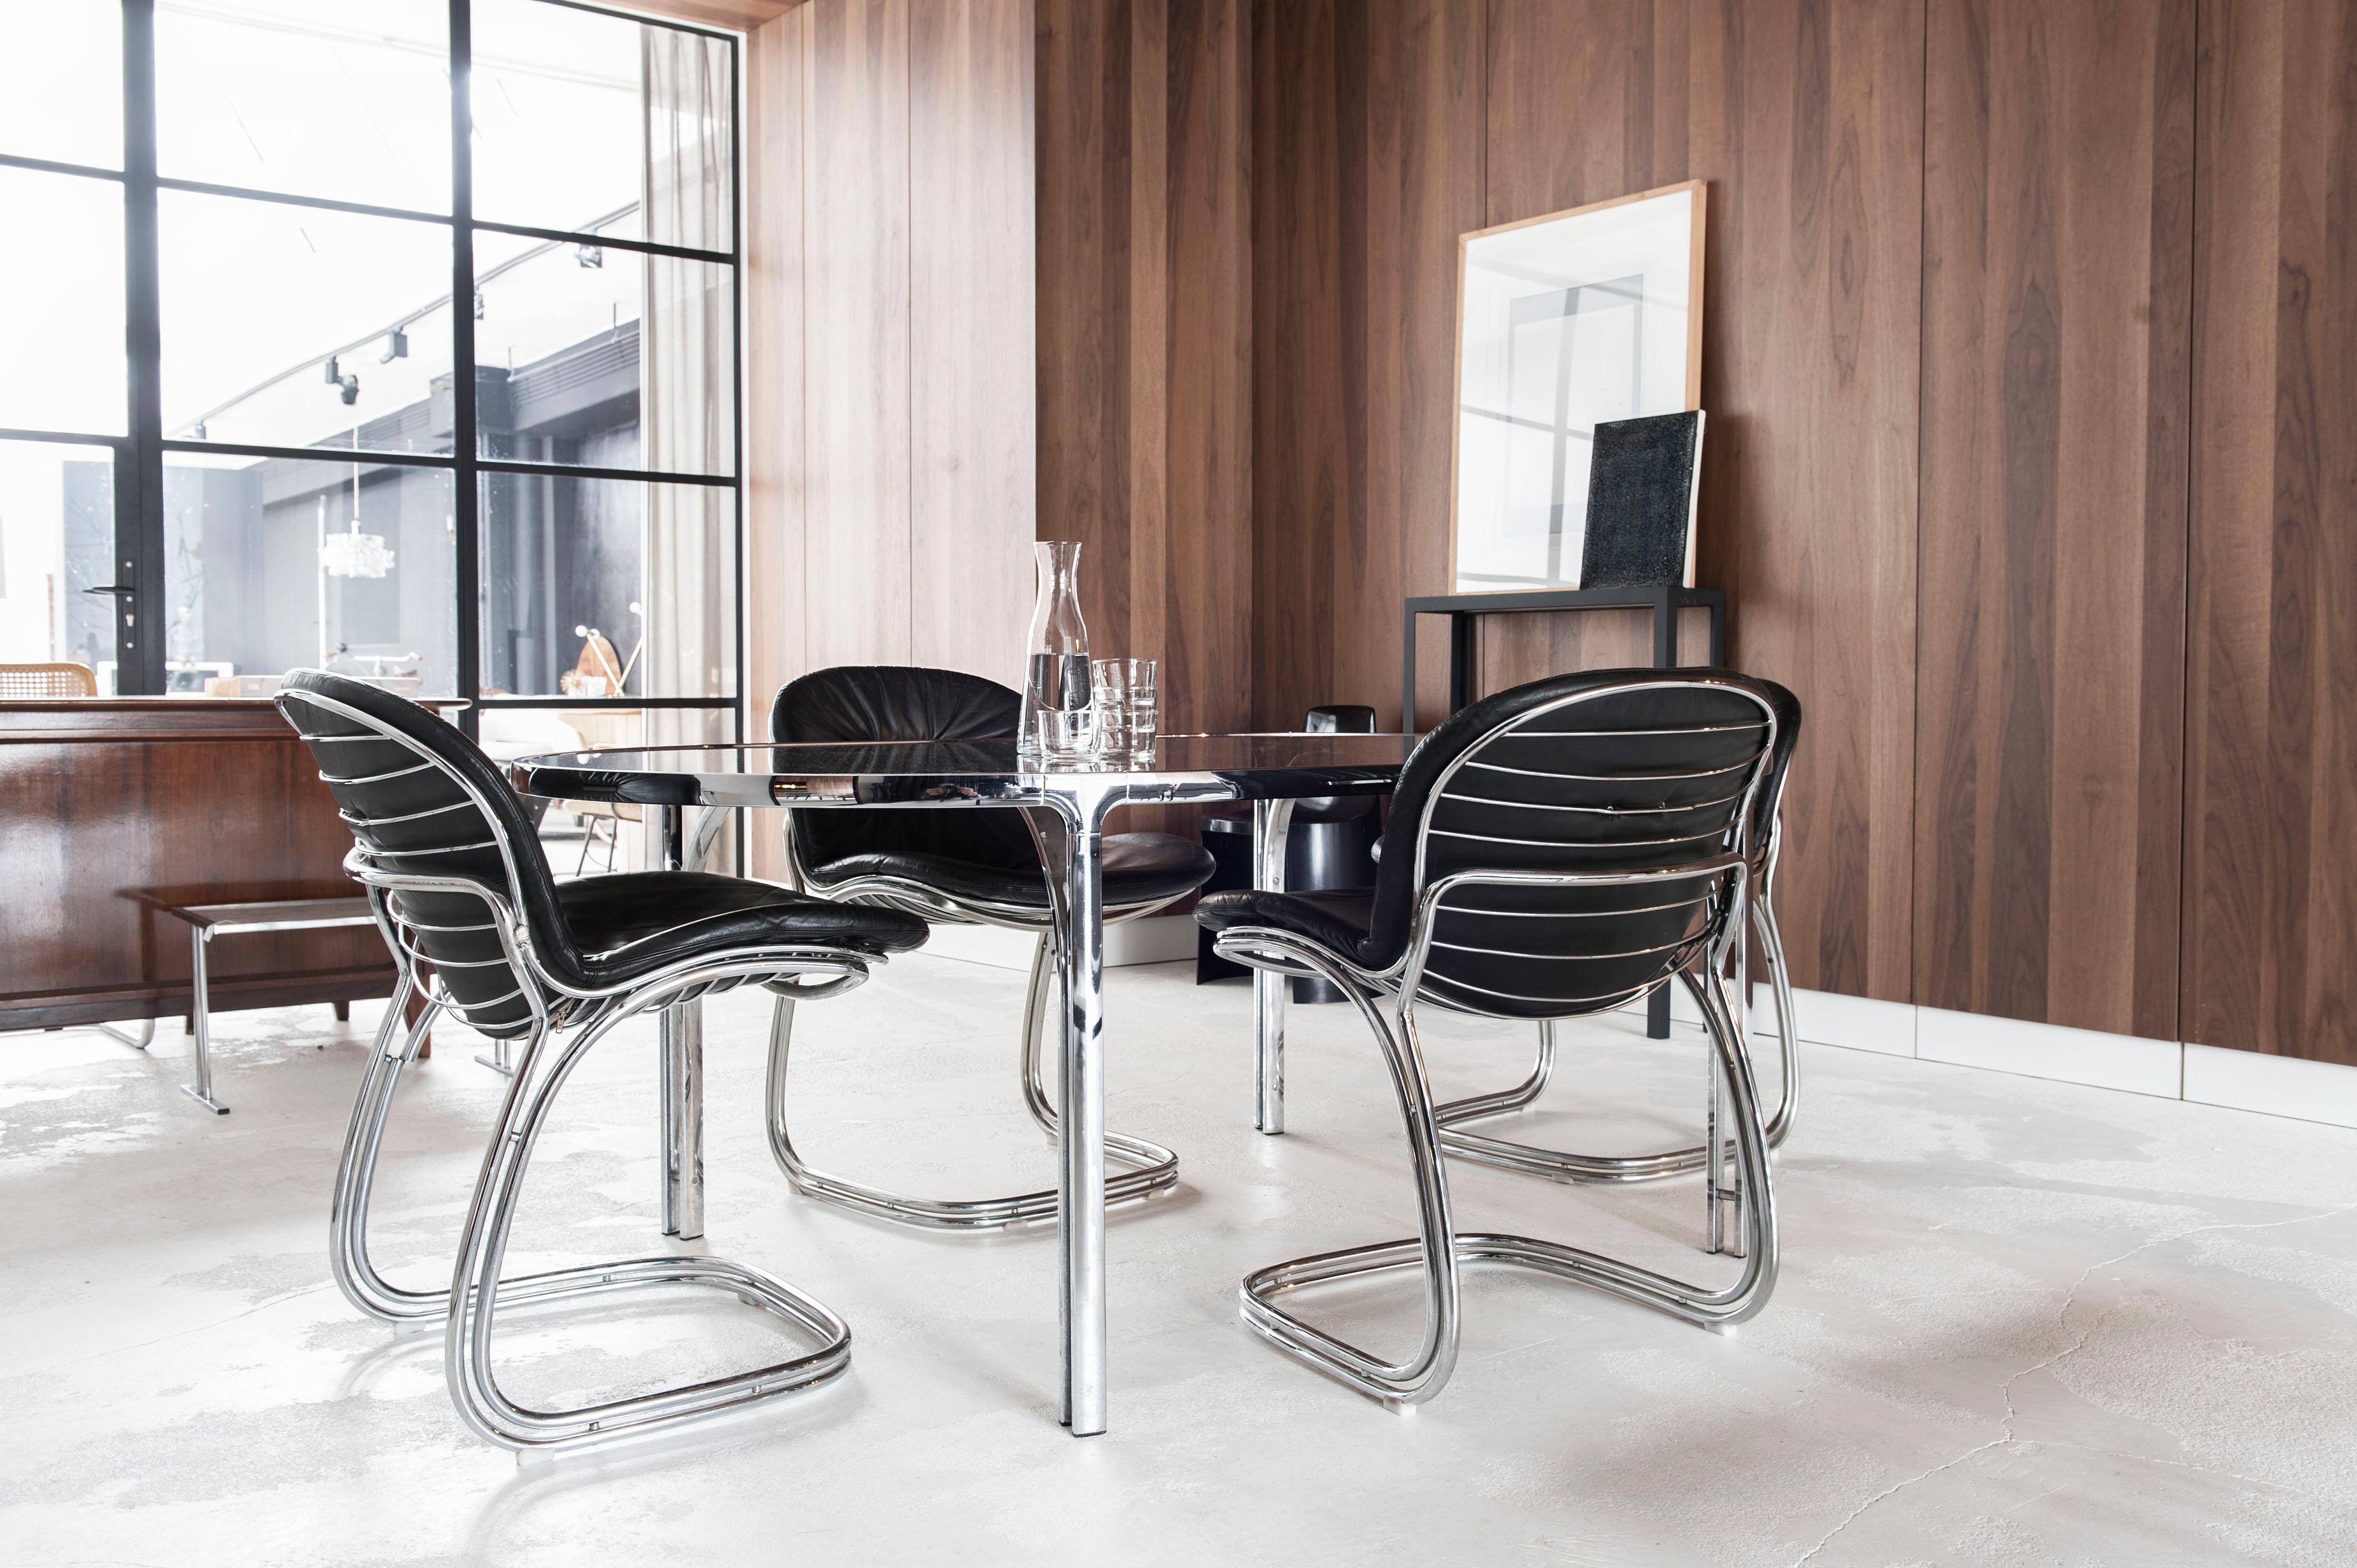 Set of four black Italian Sabrina chairs and glass table by Gastone Rinaldi for Rima. This set of four ‘Sabrina’ chairs and smoked glass table were designed by Gastone Rinaldi for Rima in Padove Italy during the 1970s. The cantilevered chairs